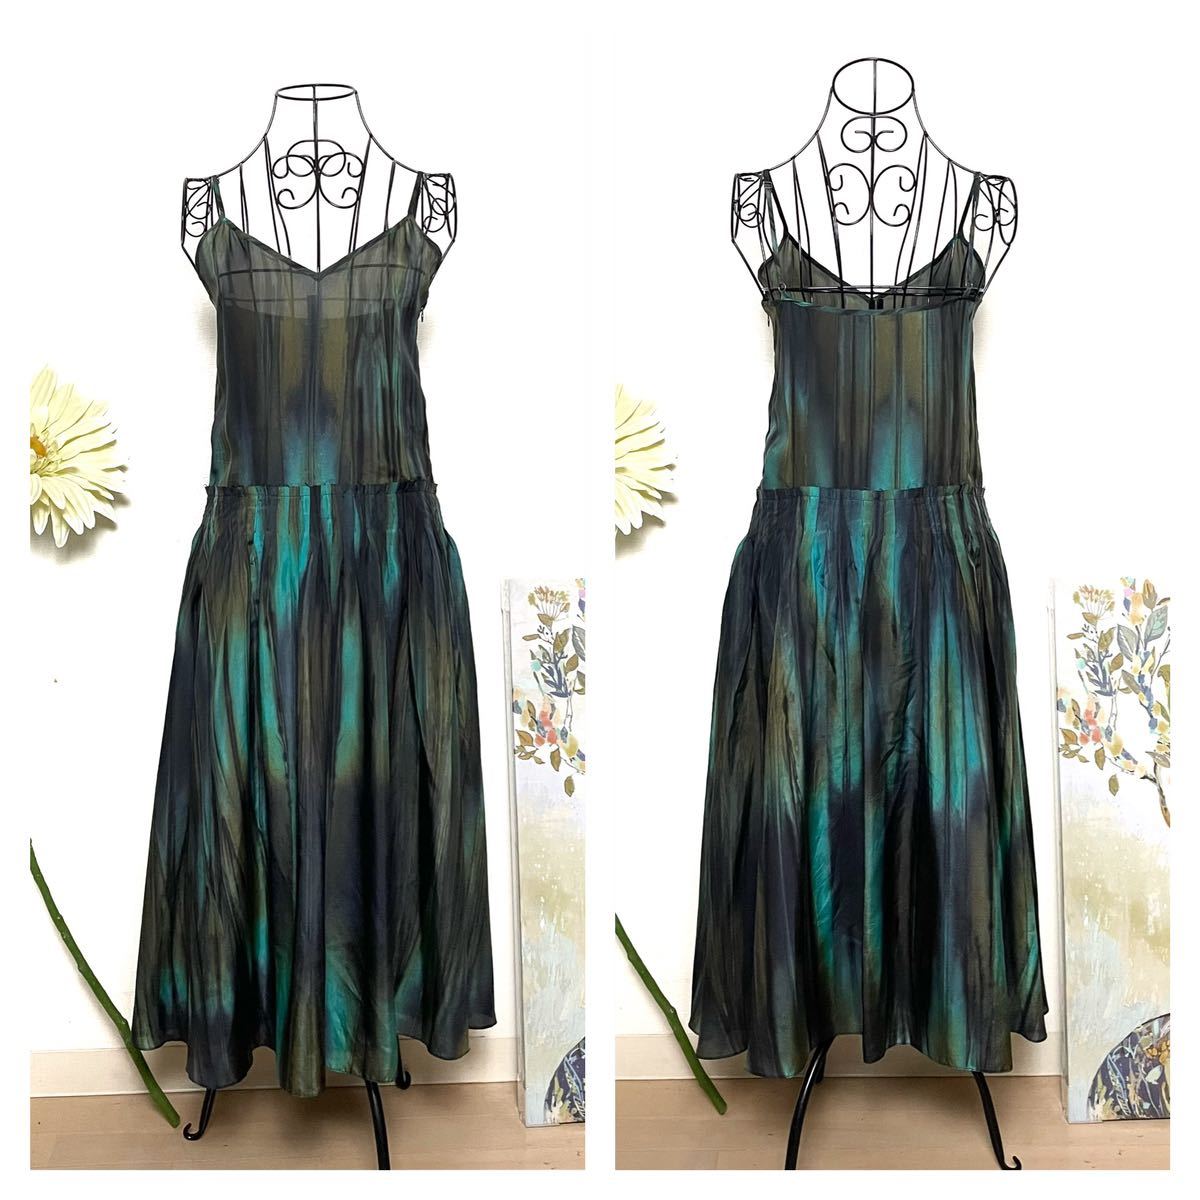 theory theory total pattern Cami One-piece long One-piece flair A line party dress 2 black green black green 